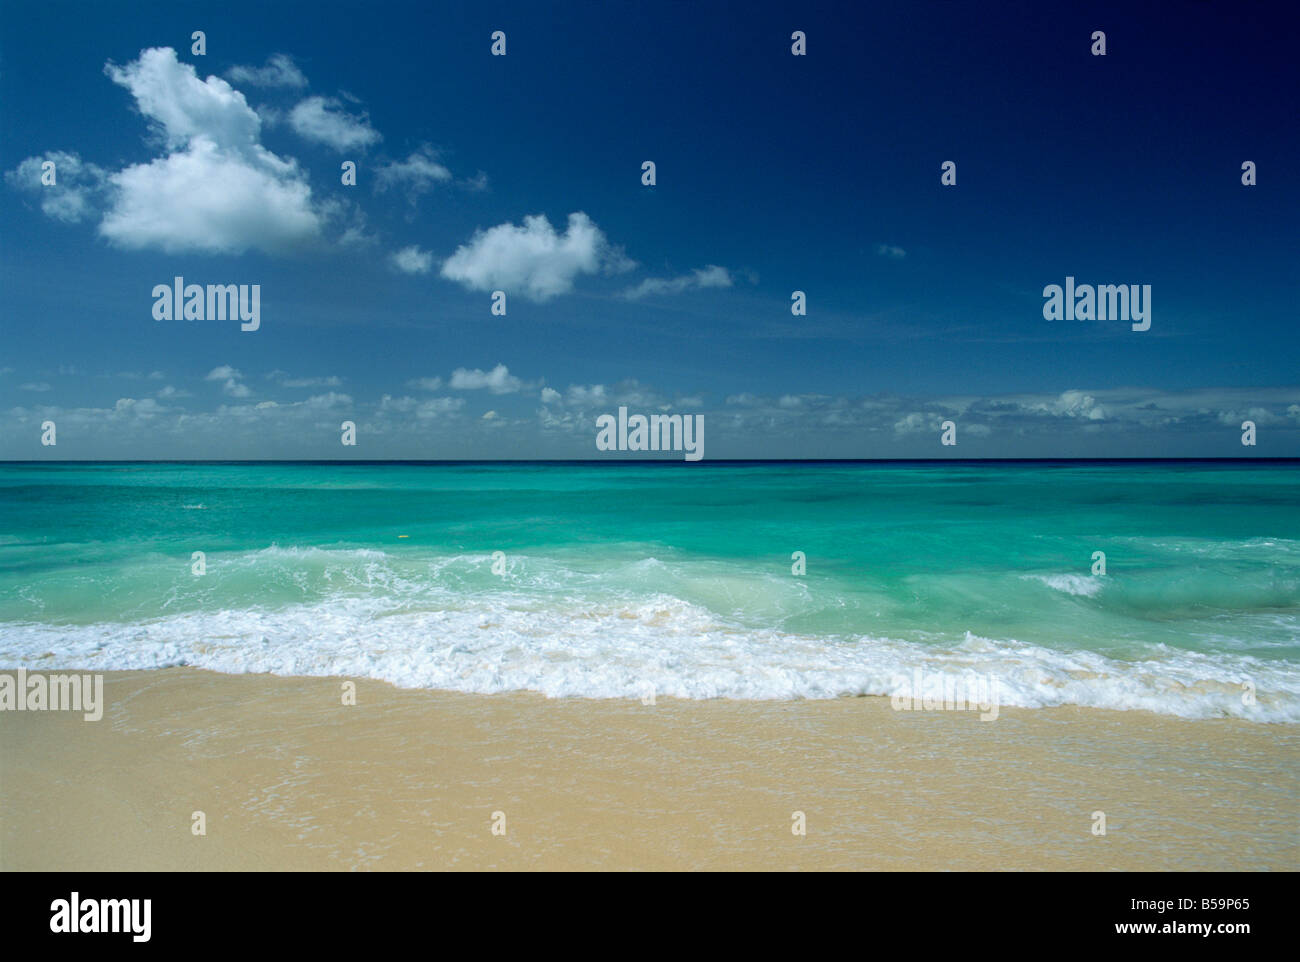 Sea and sand at Worthing Beach on the popular south coast of the southern parish of Christ Church, Barbados, Caribbean Stock Photo